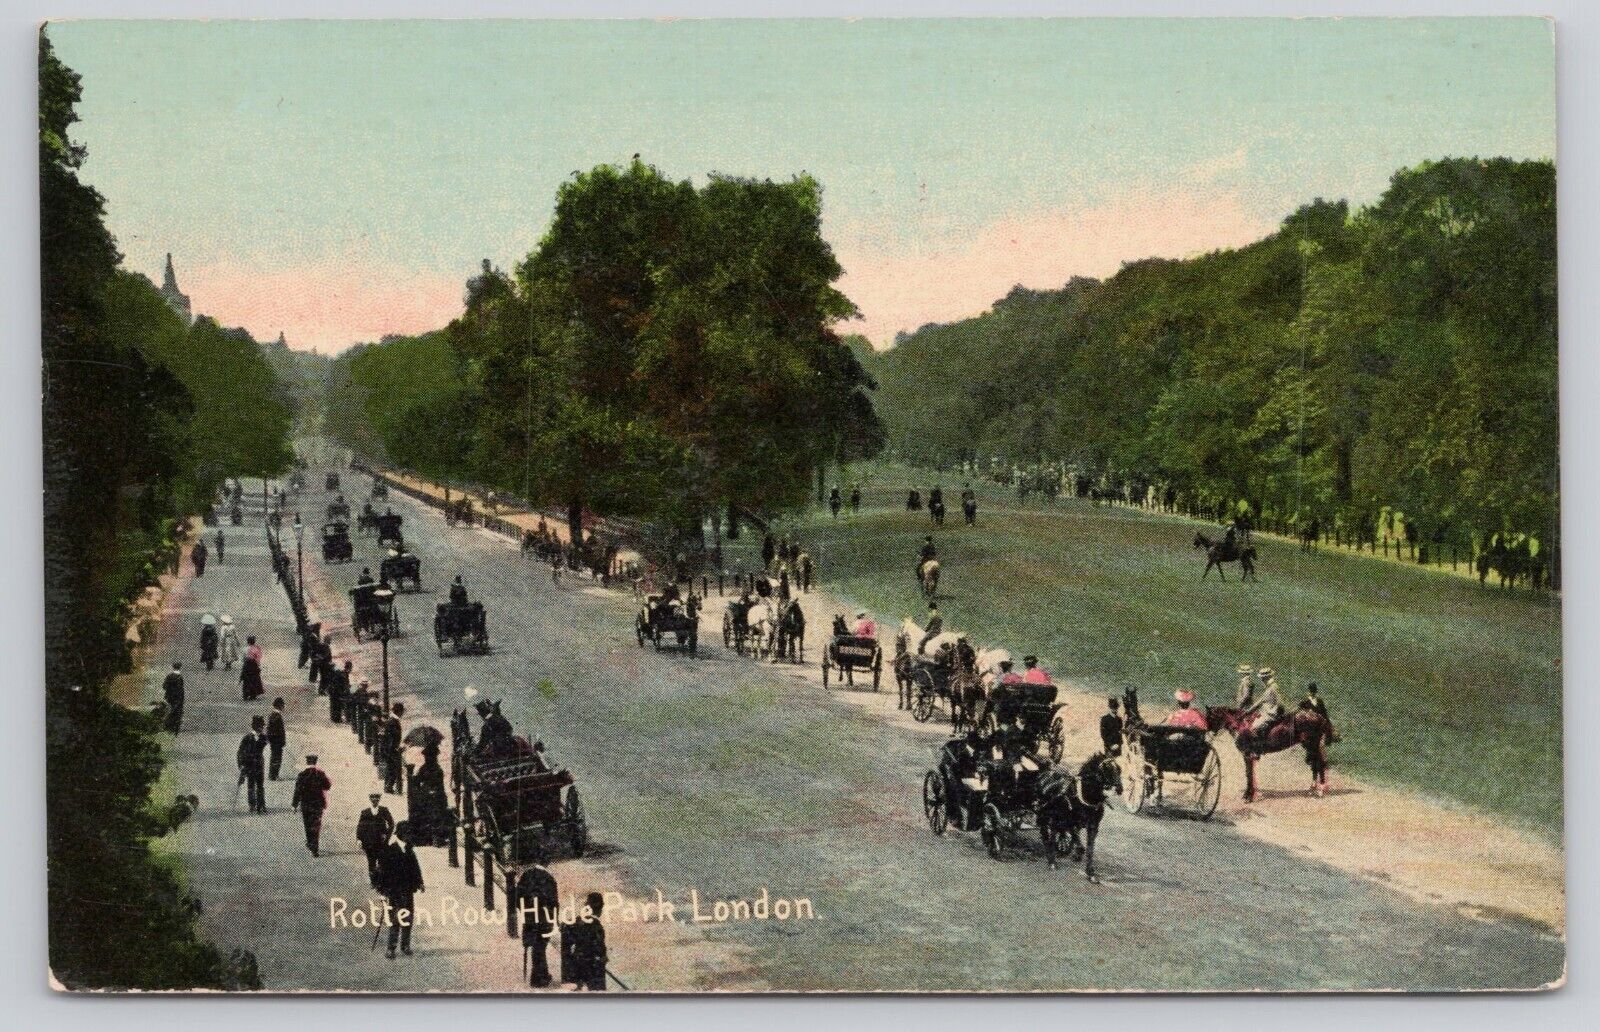 Rotten Row Hyde Park London England People Horses and Carriages Antique Postcard